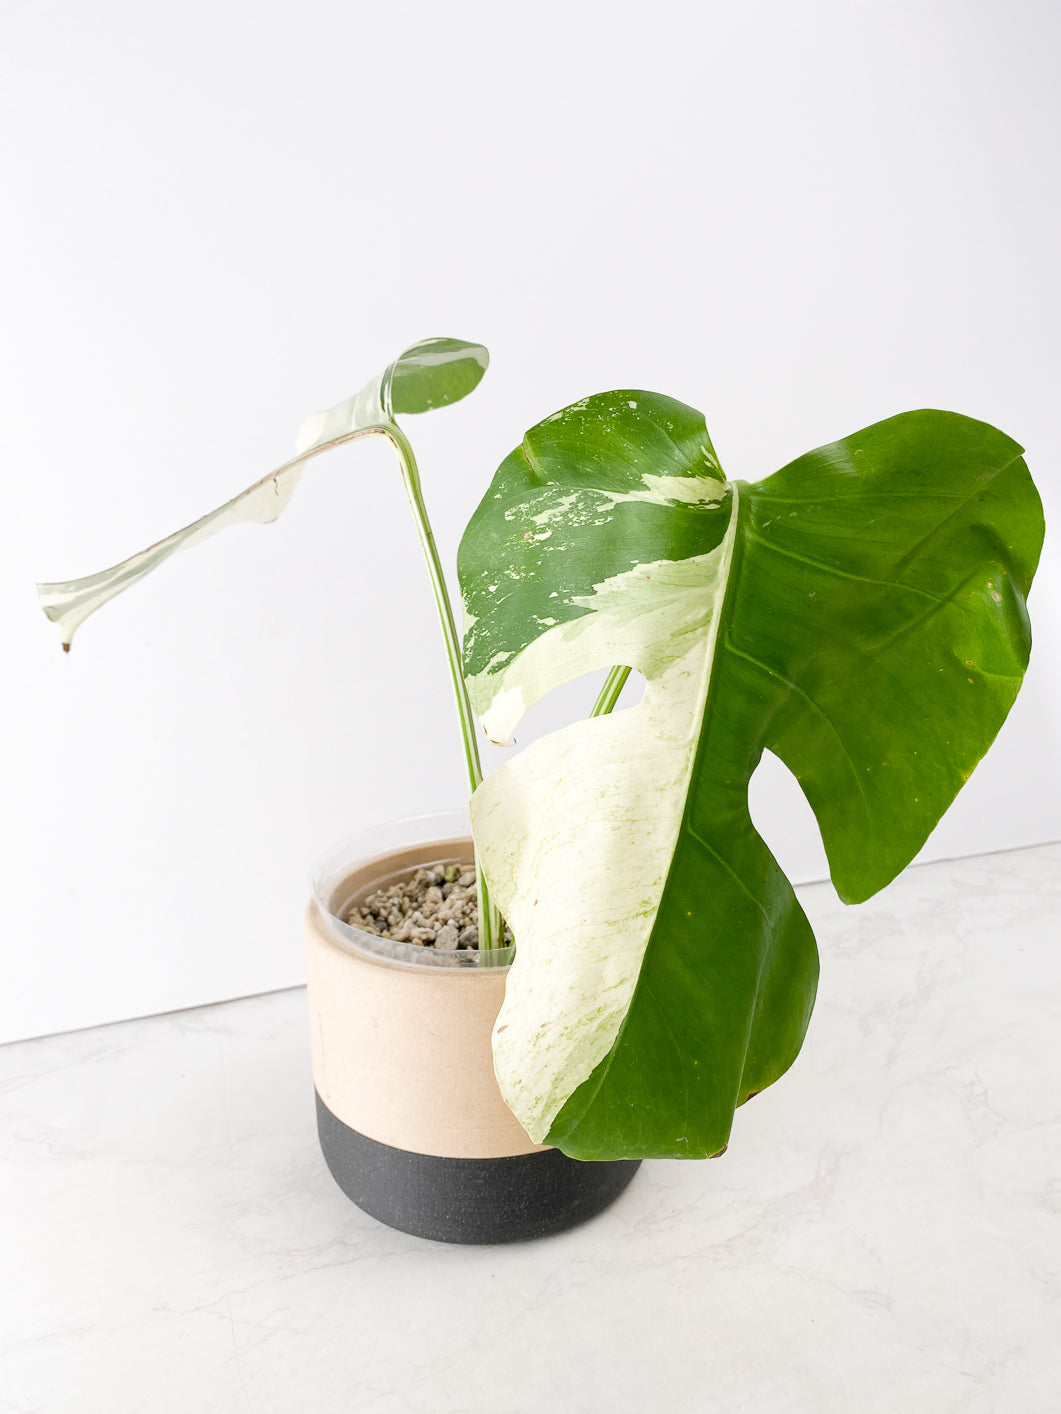 Monstera Mint Noid 2 leaves rooting top cutting